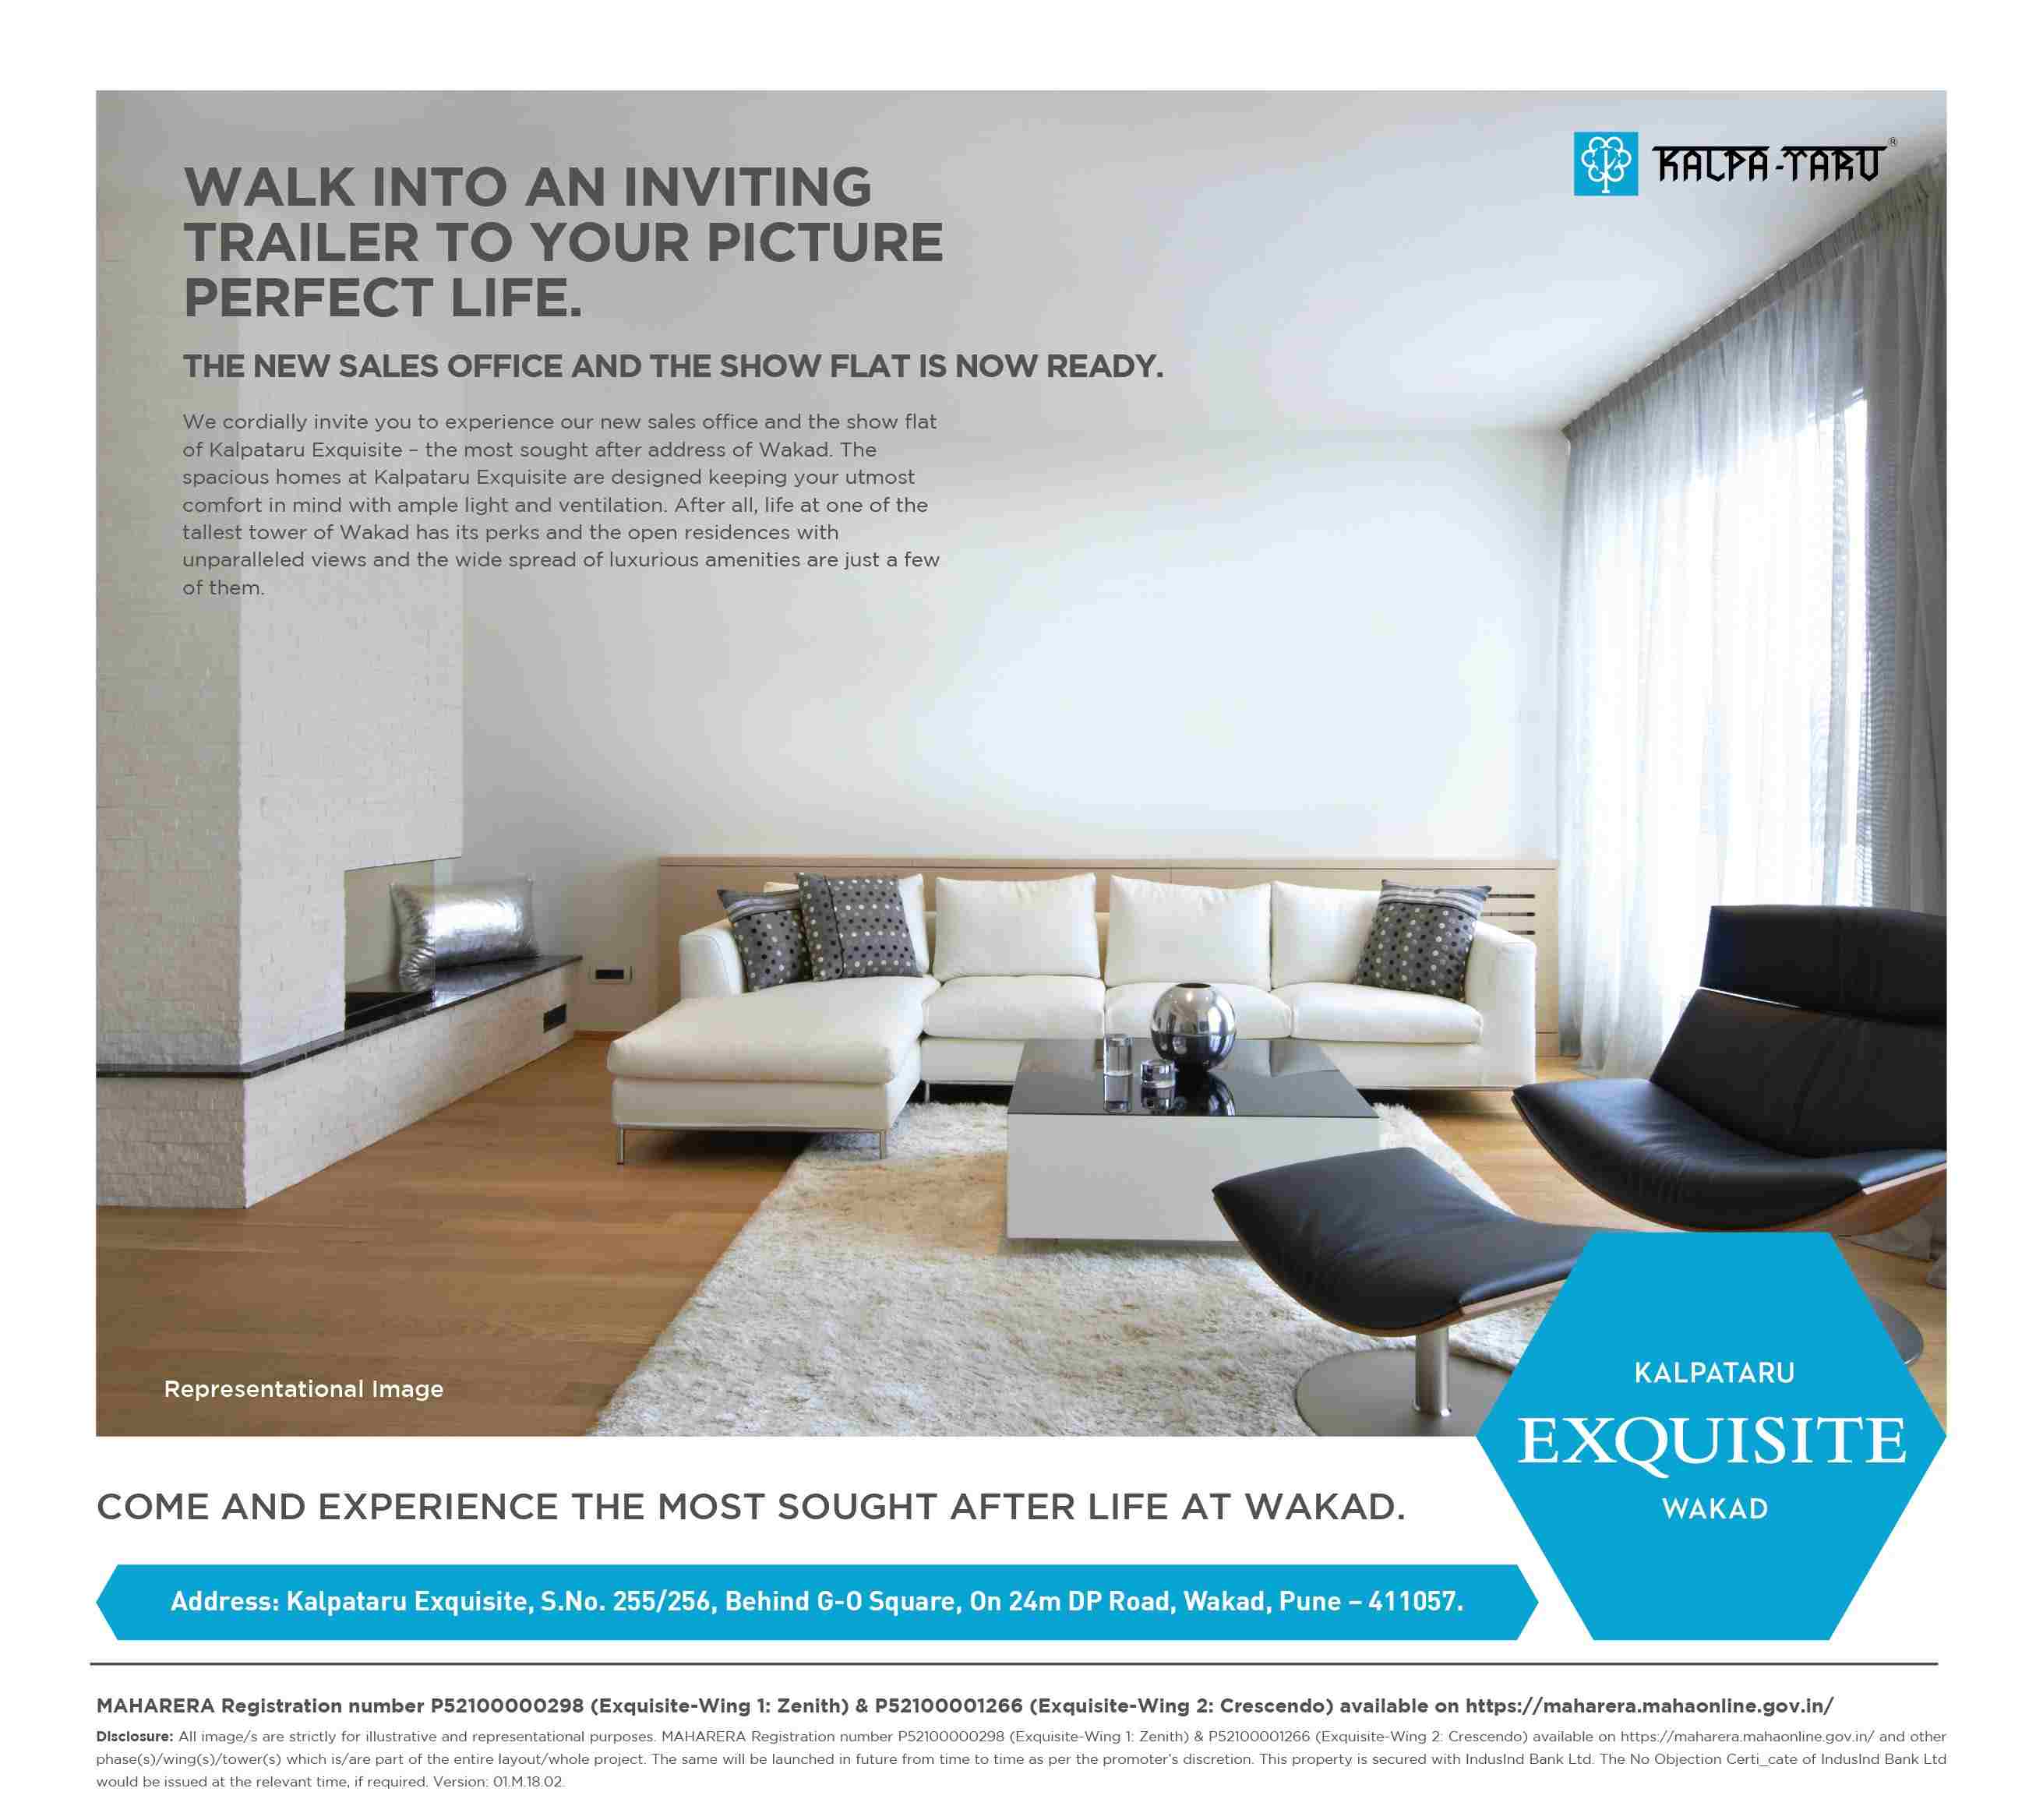 New sales office and the show flat is now ready at Kalpataru Exquisite in Pune